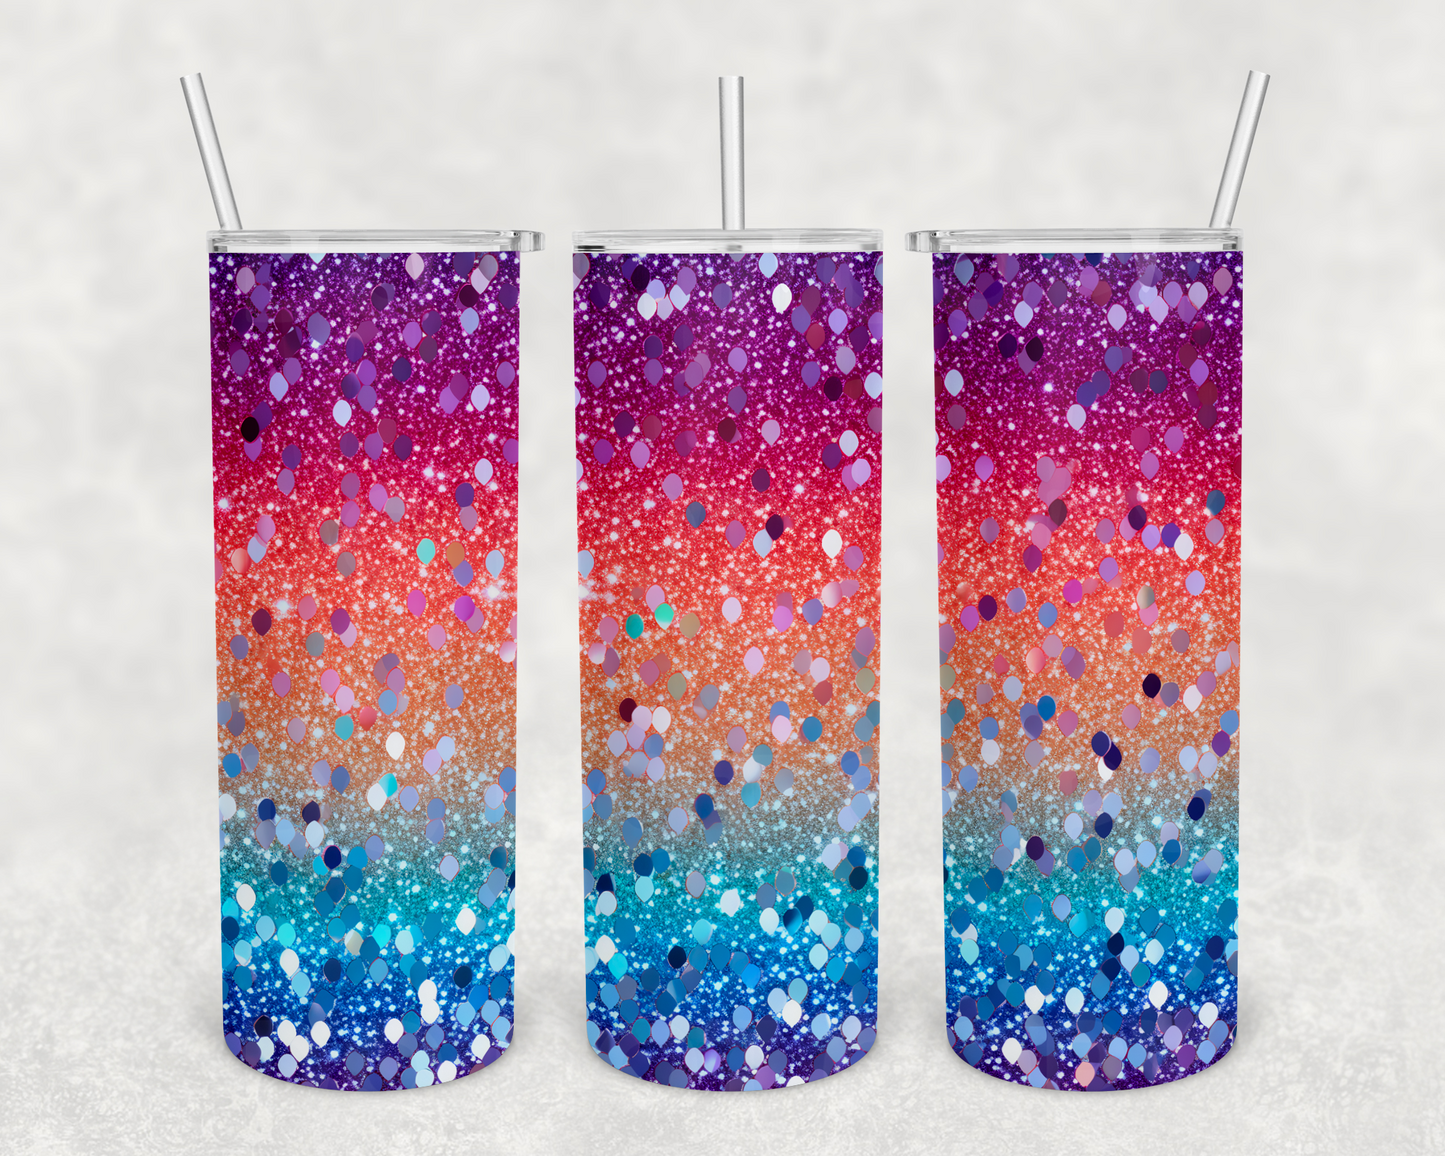 Stardust faux glitter 20 oz tumbler (finished product)